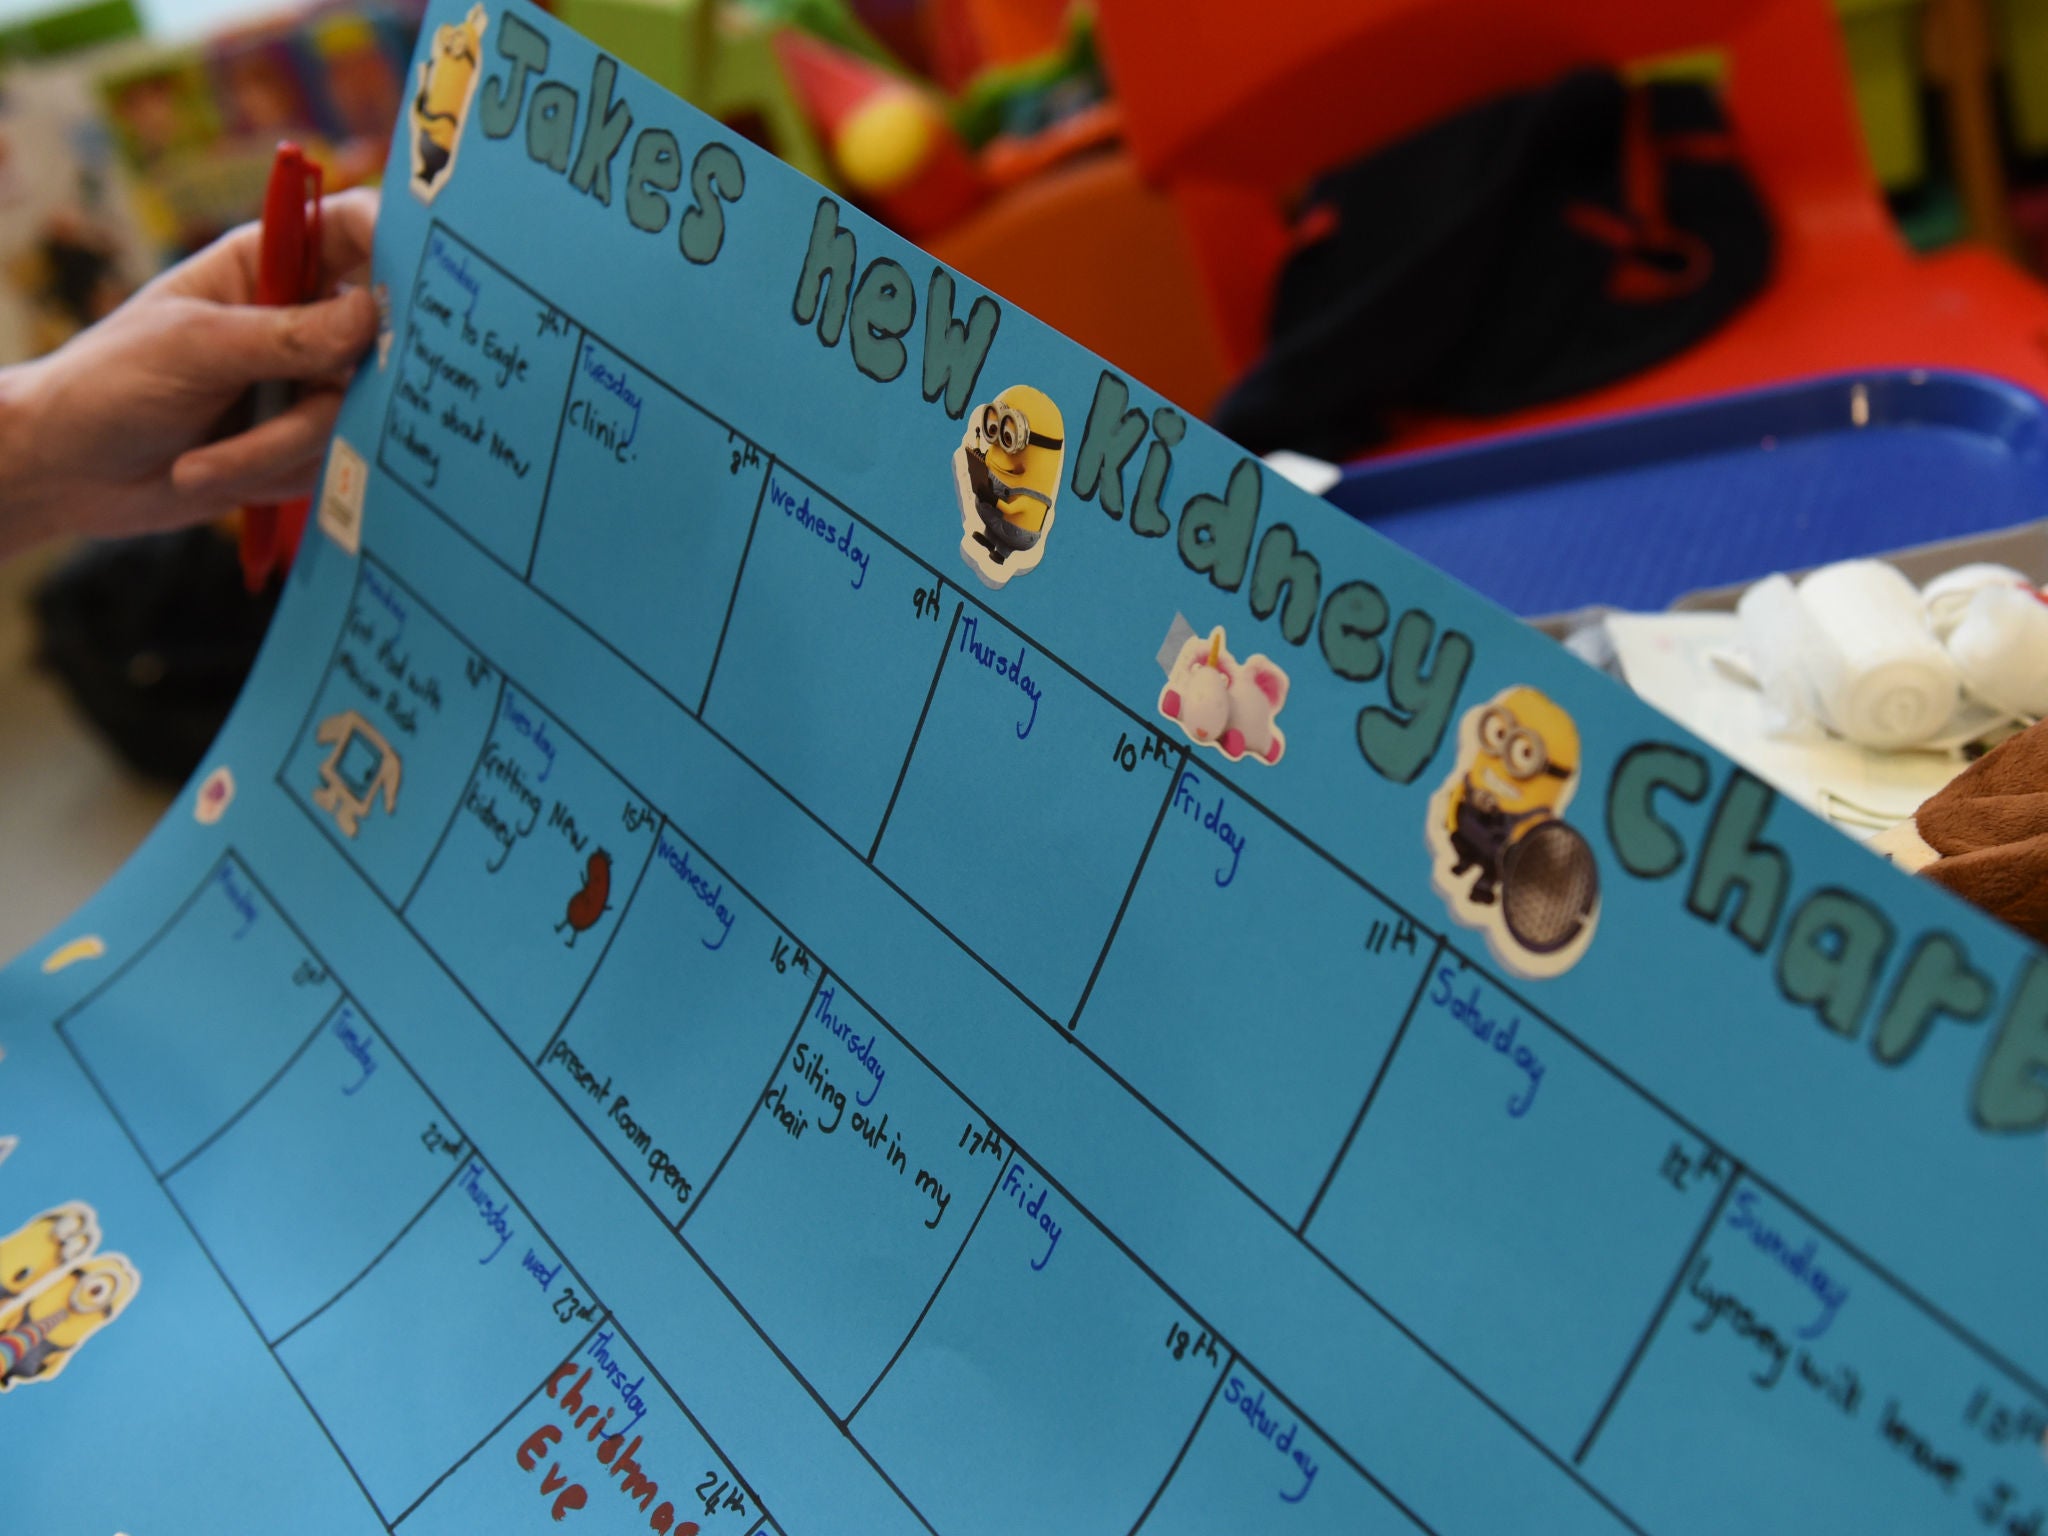 A calendar Lynsey has made for Jake shows key dates before and after his transplant